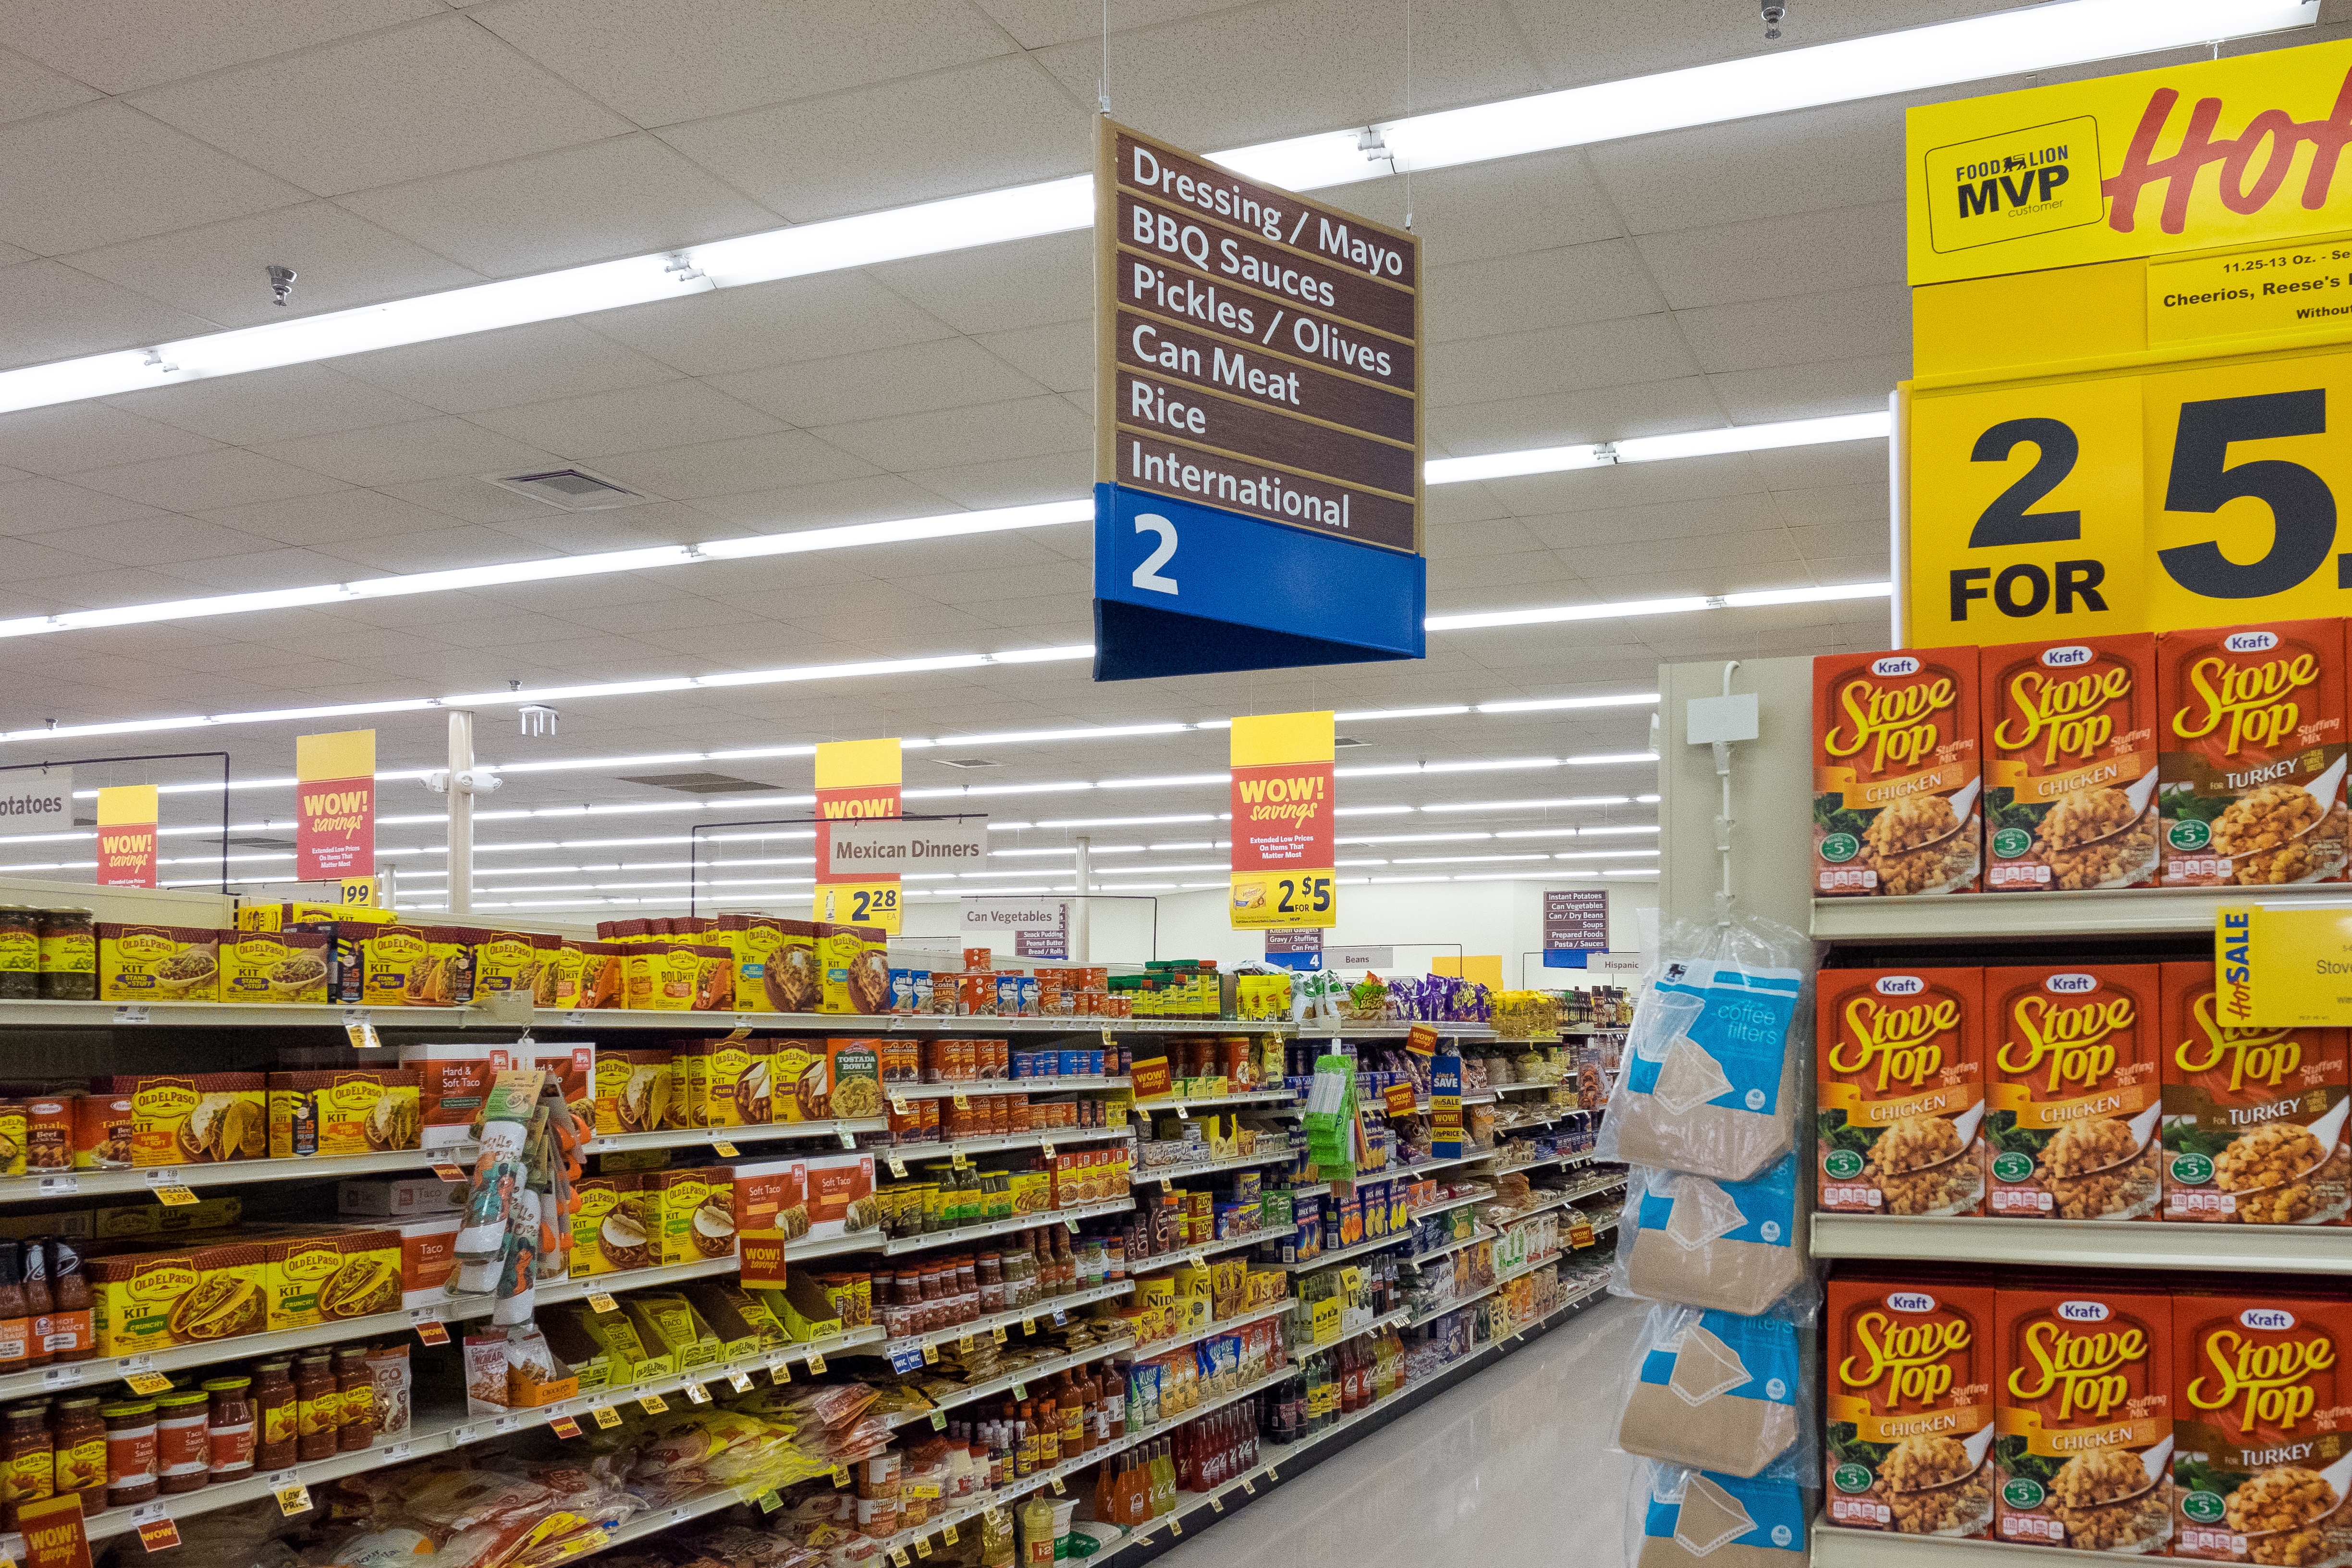 Food Lion Sales Promo and Wayfinding